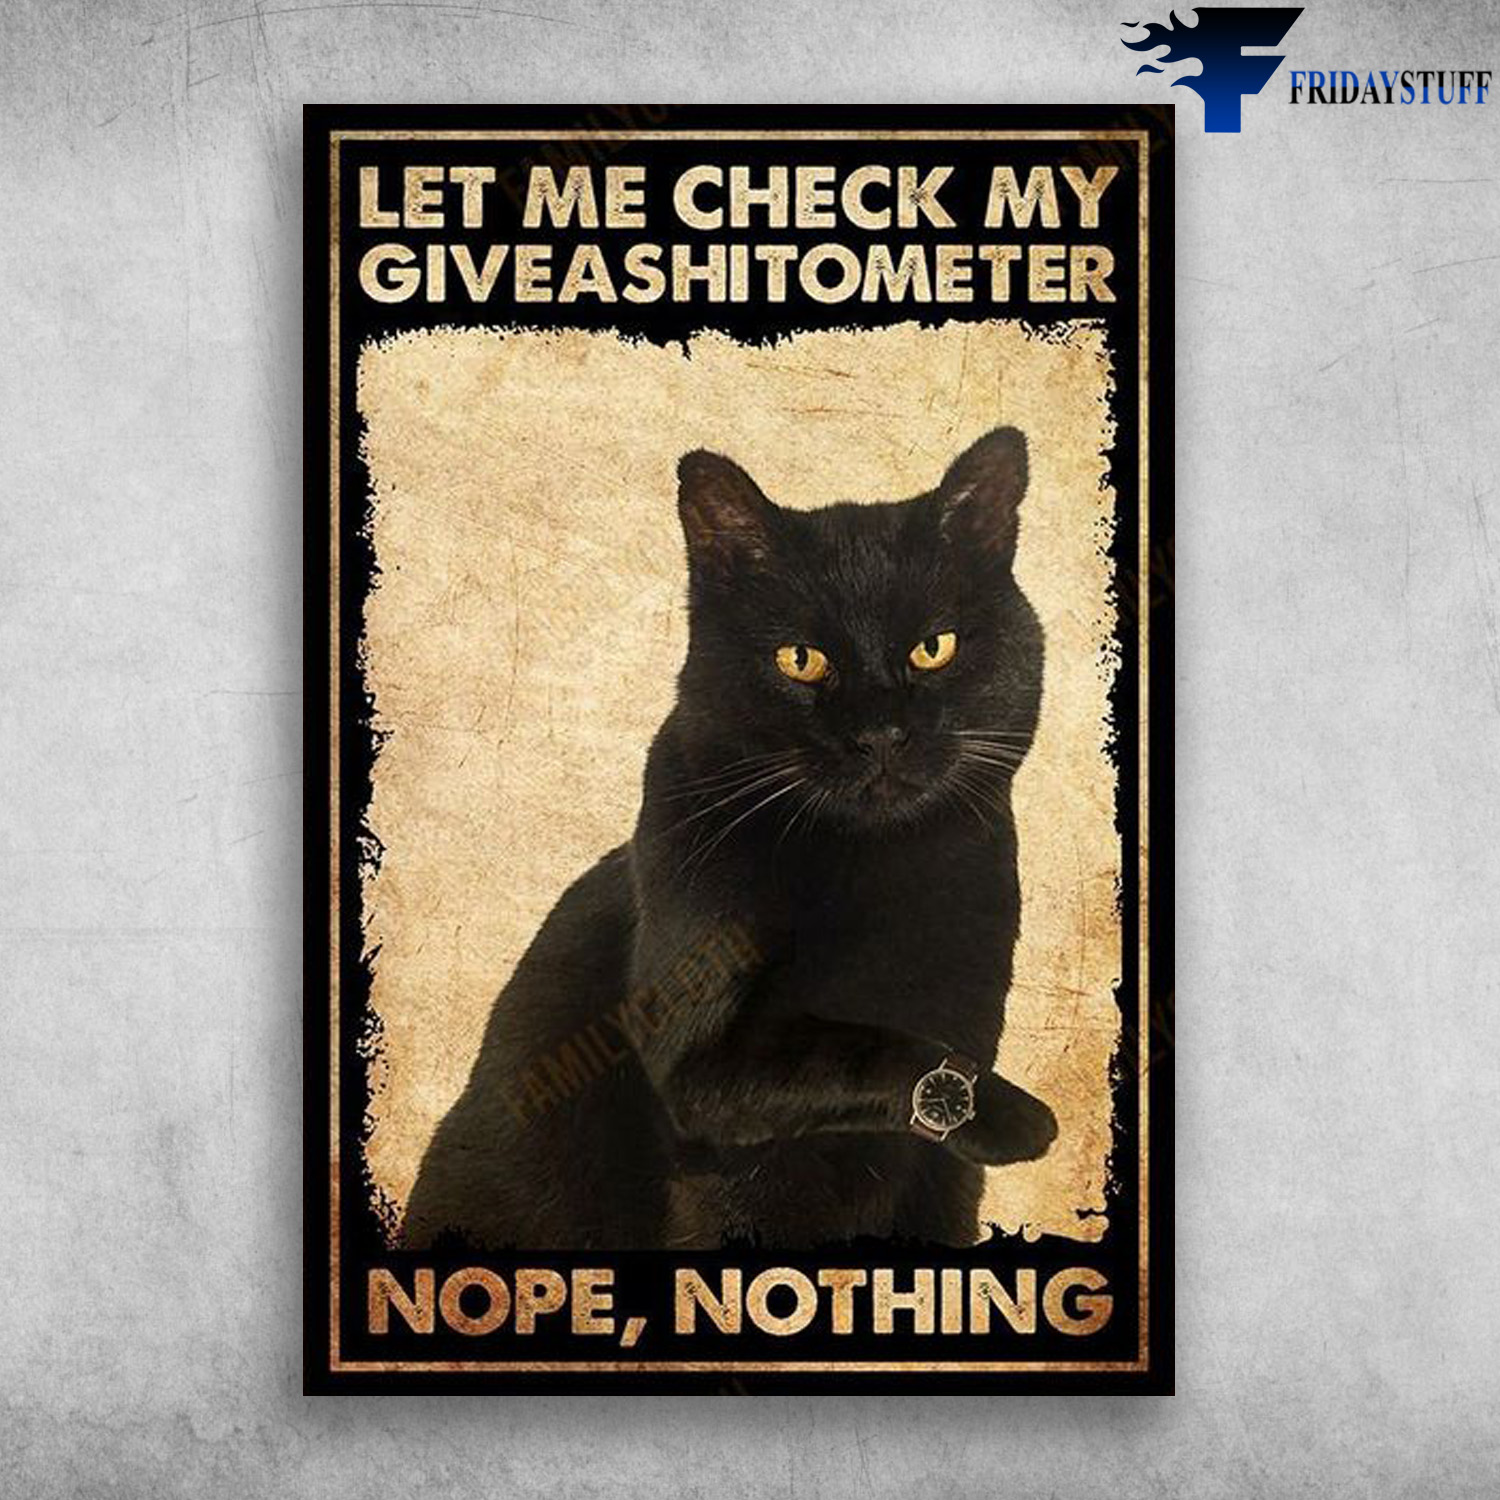 Black Cat Wearing Watch - Let Me Check My Giveashitometer, Nope, Nothing